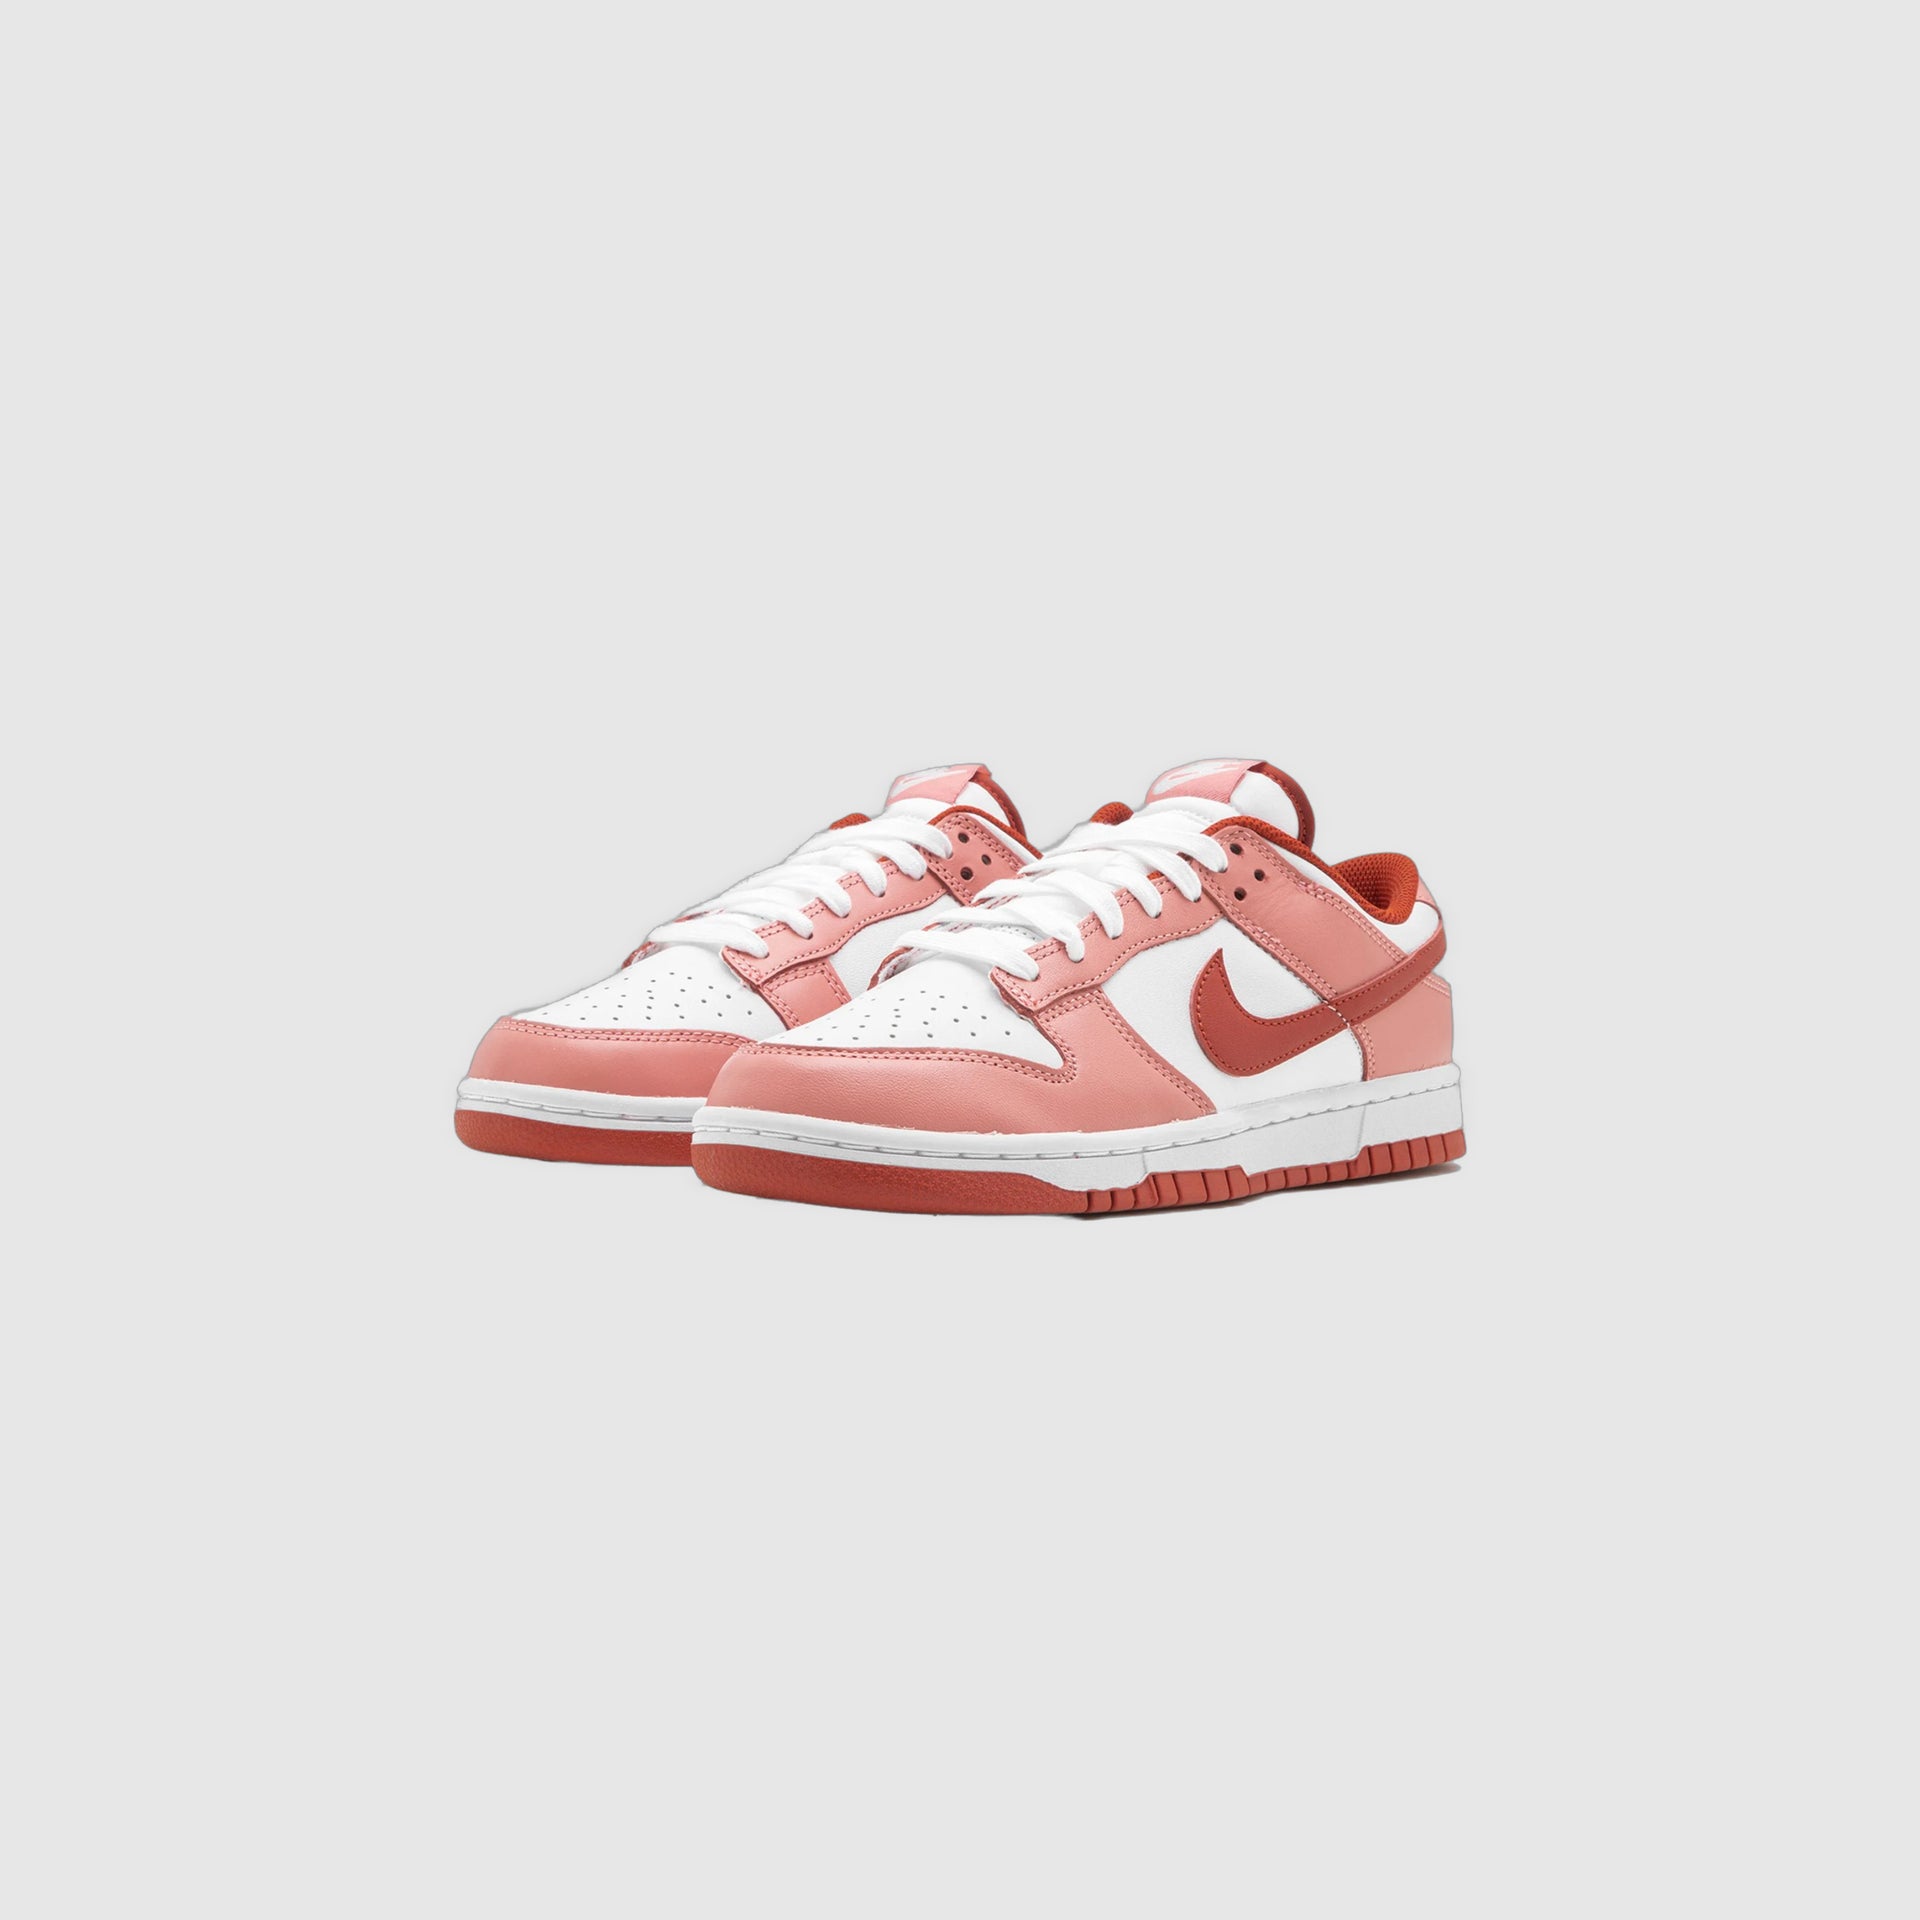 DUNK LOW WMNS
"Red Stardust"